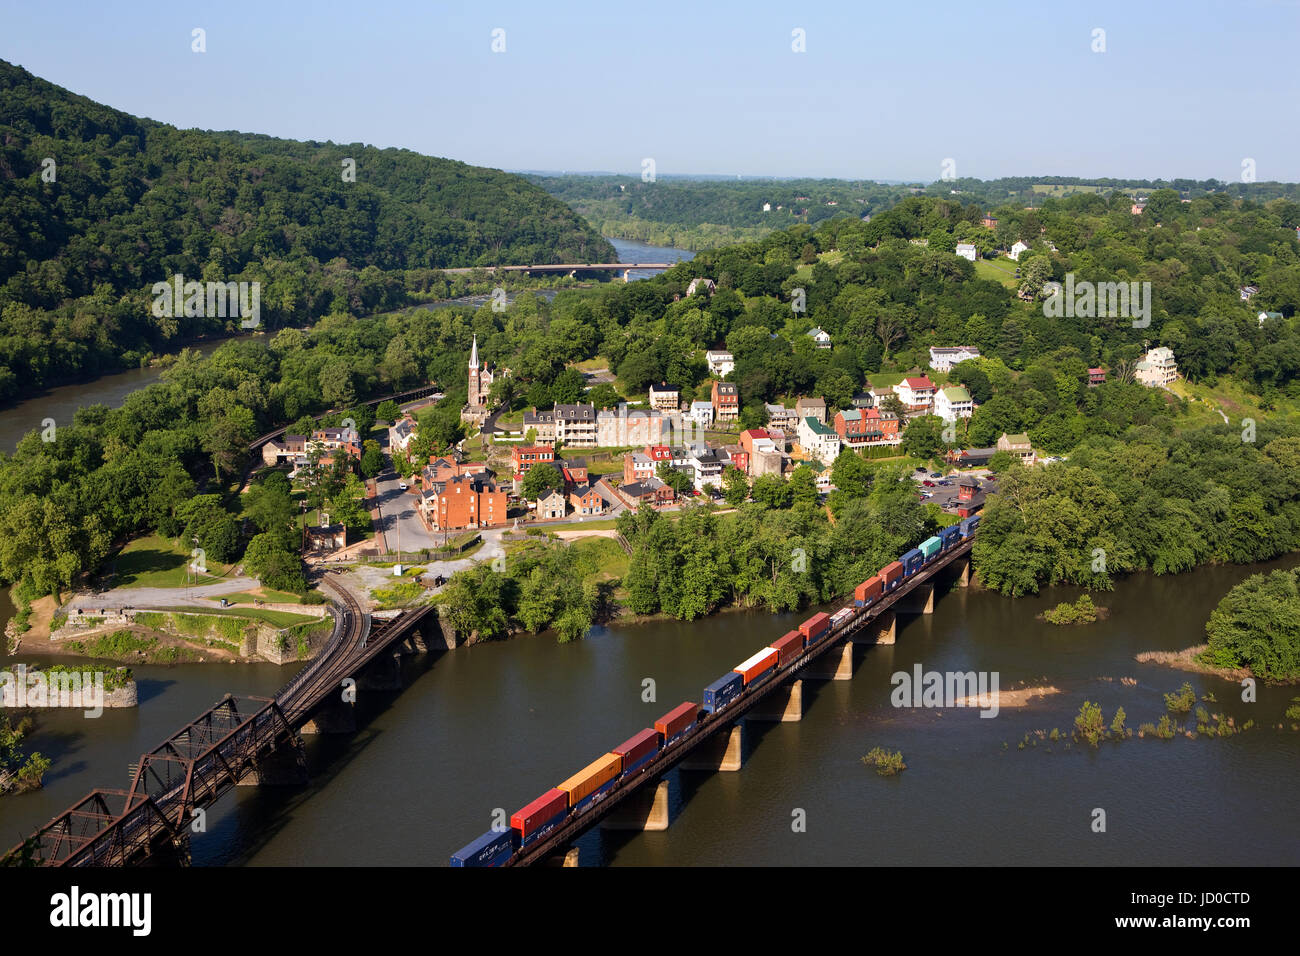 A train rolls across the Shenandoah River in an aerial view of the town of Harpers Ferry, West Virginia, which includes Harpers Ferry National Histori Stock Photo